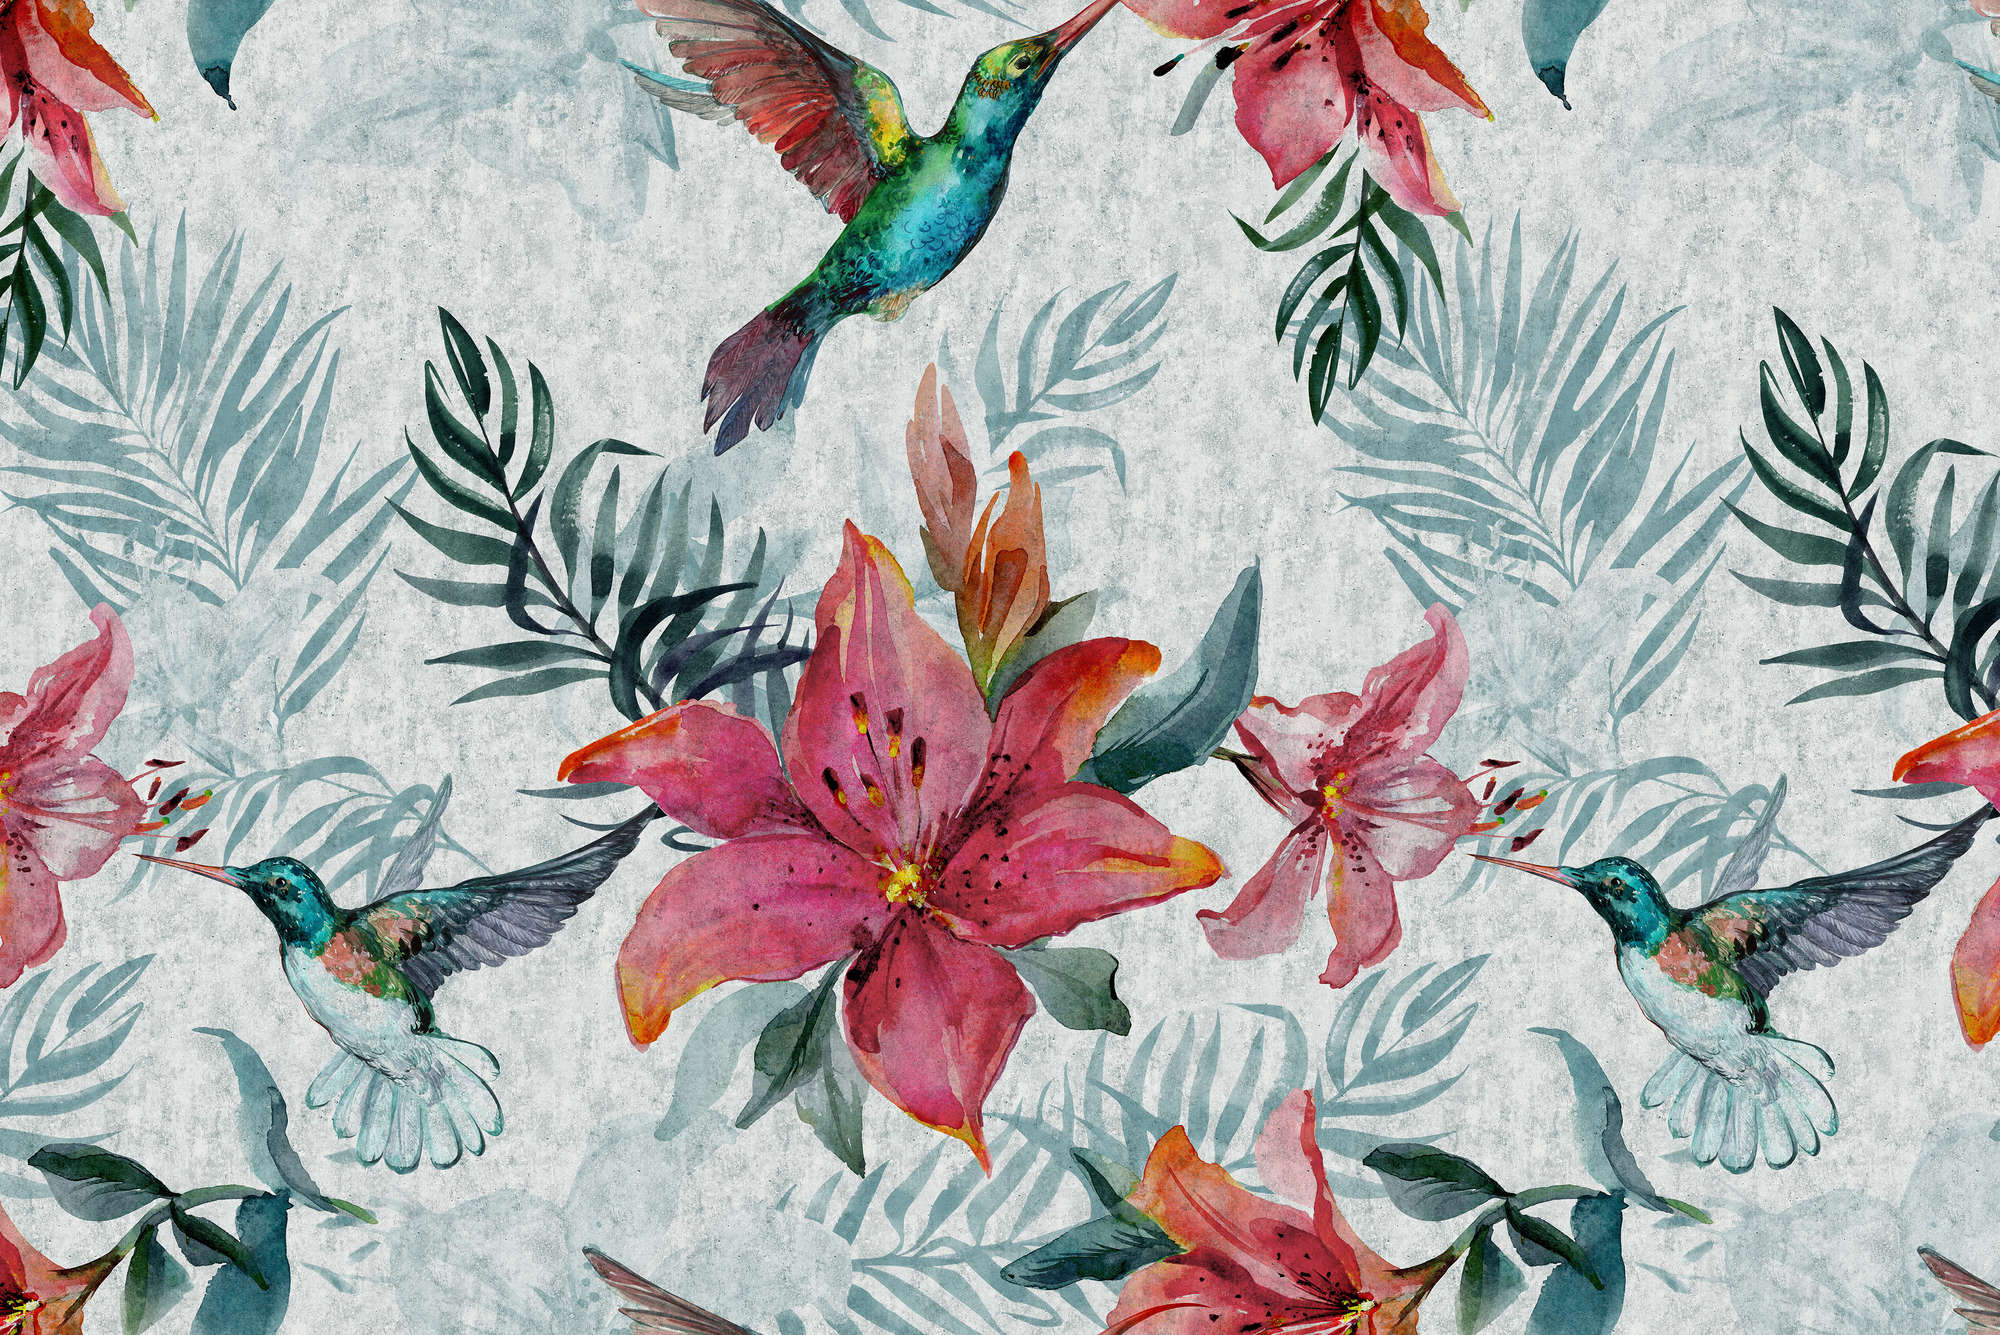             Graphic mural jungle flowers with birds on premium smooth vinyl
        